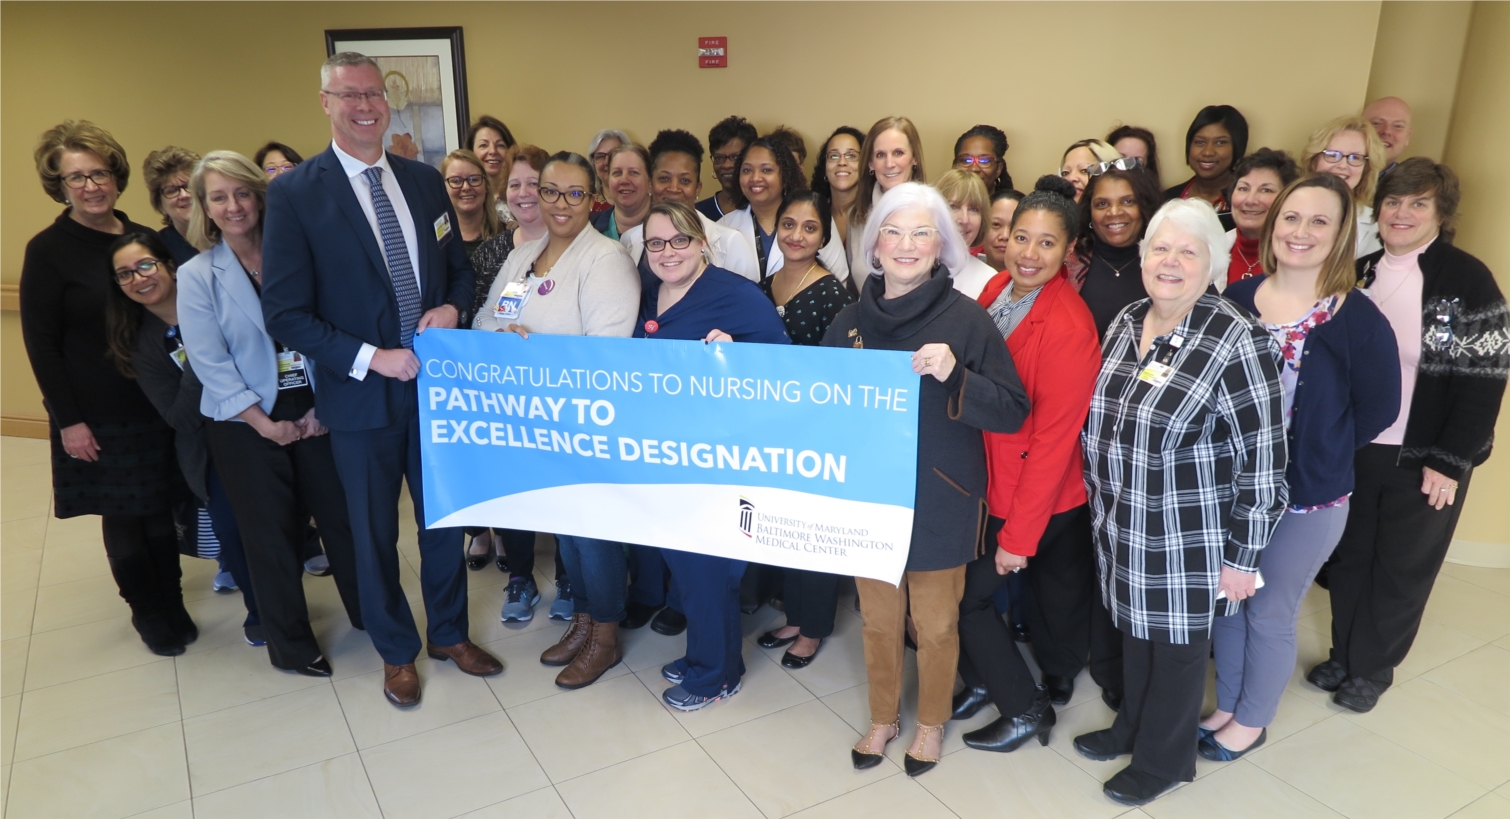 UM BWMC is a Pathway to Excellence designated organization. This is a special designation signifying nursing excellence, from the American Nurses Credentialing Center.